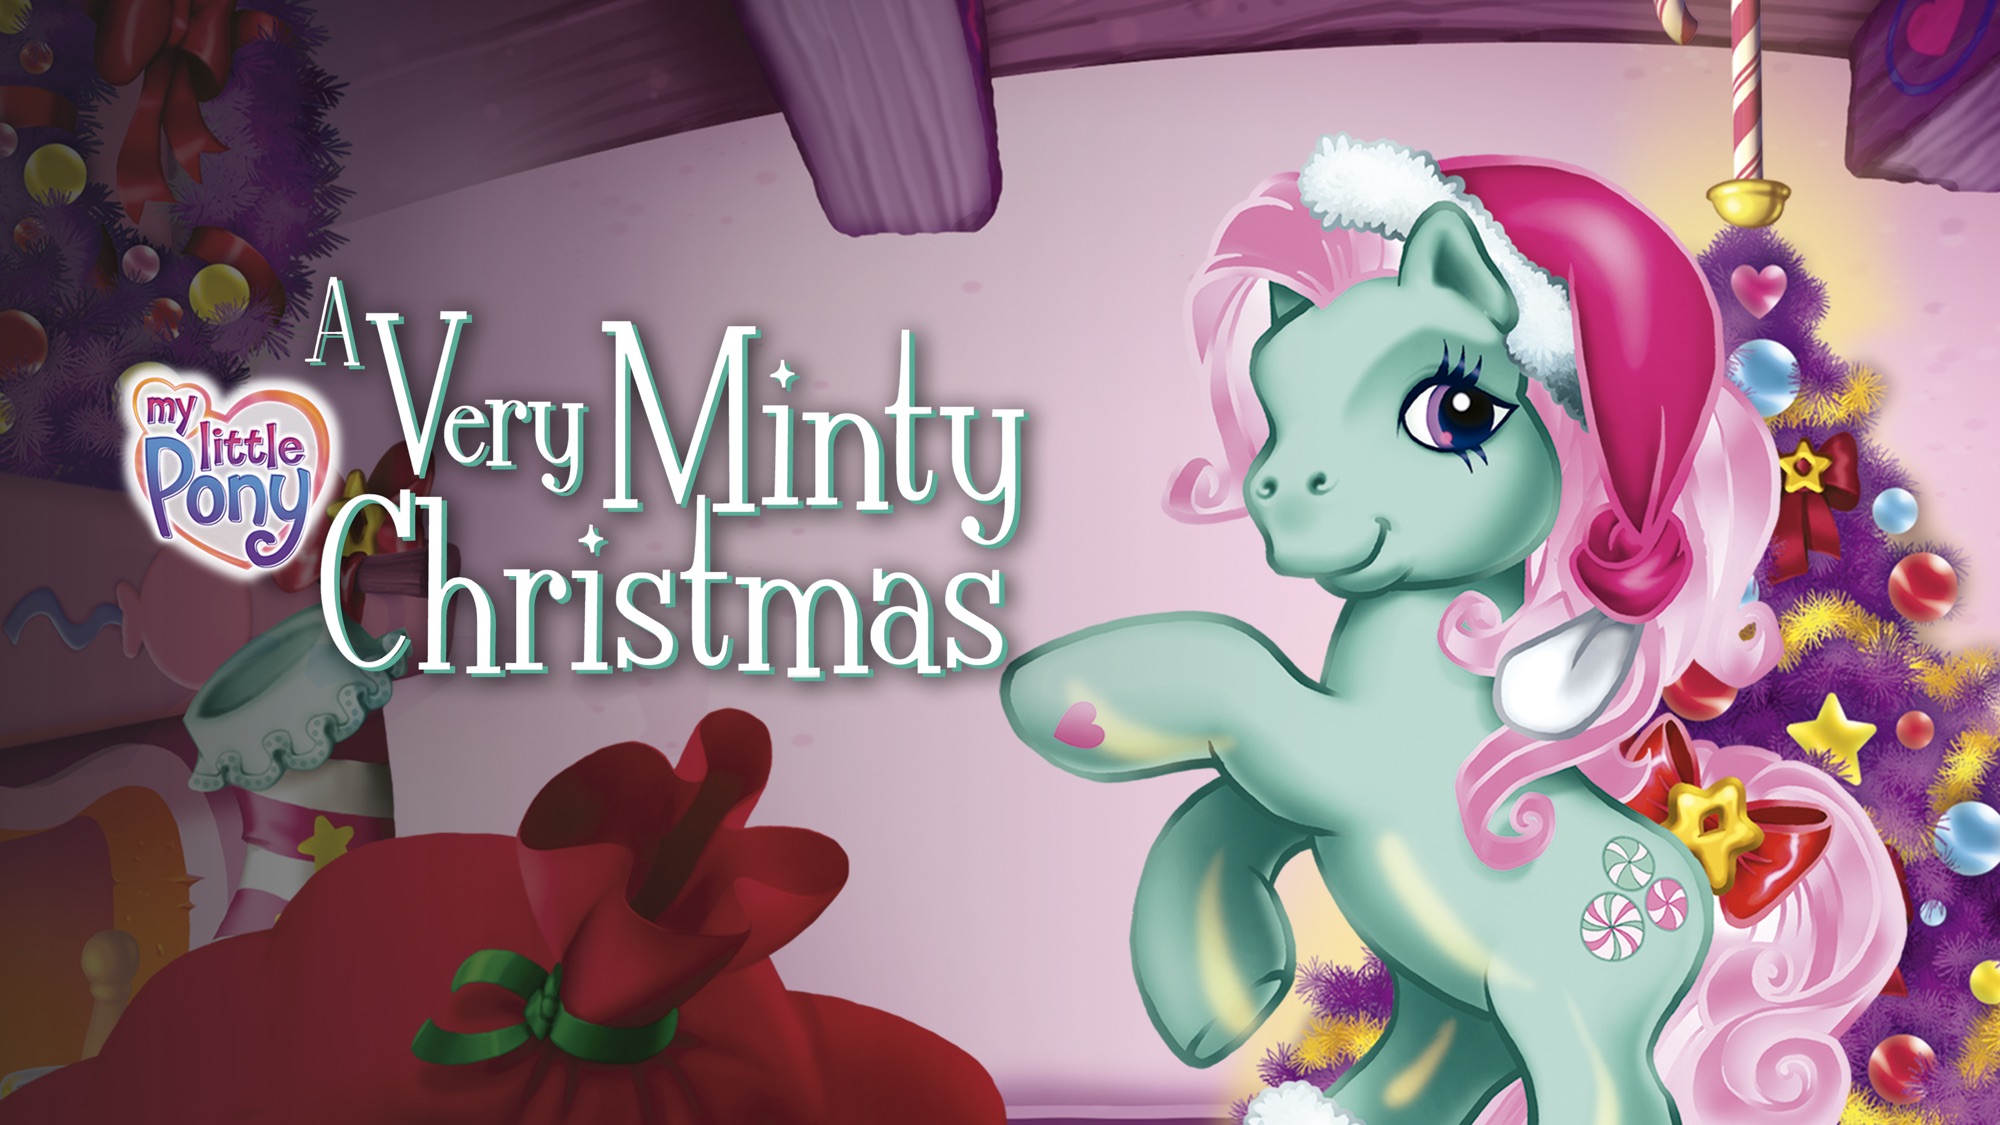 My Little Pony: A Very Minty Christmas - wide 1